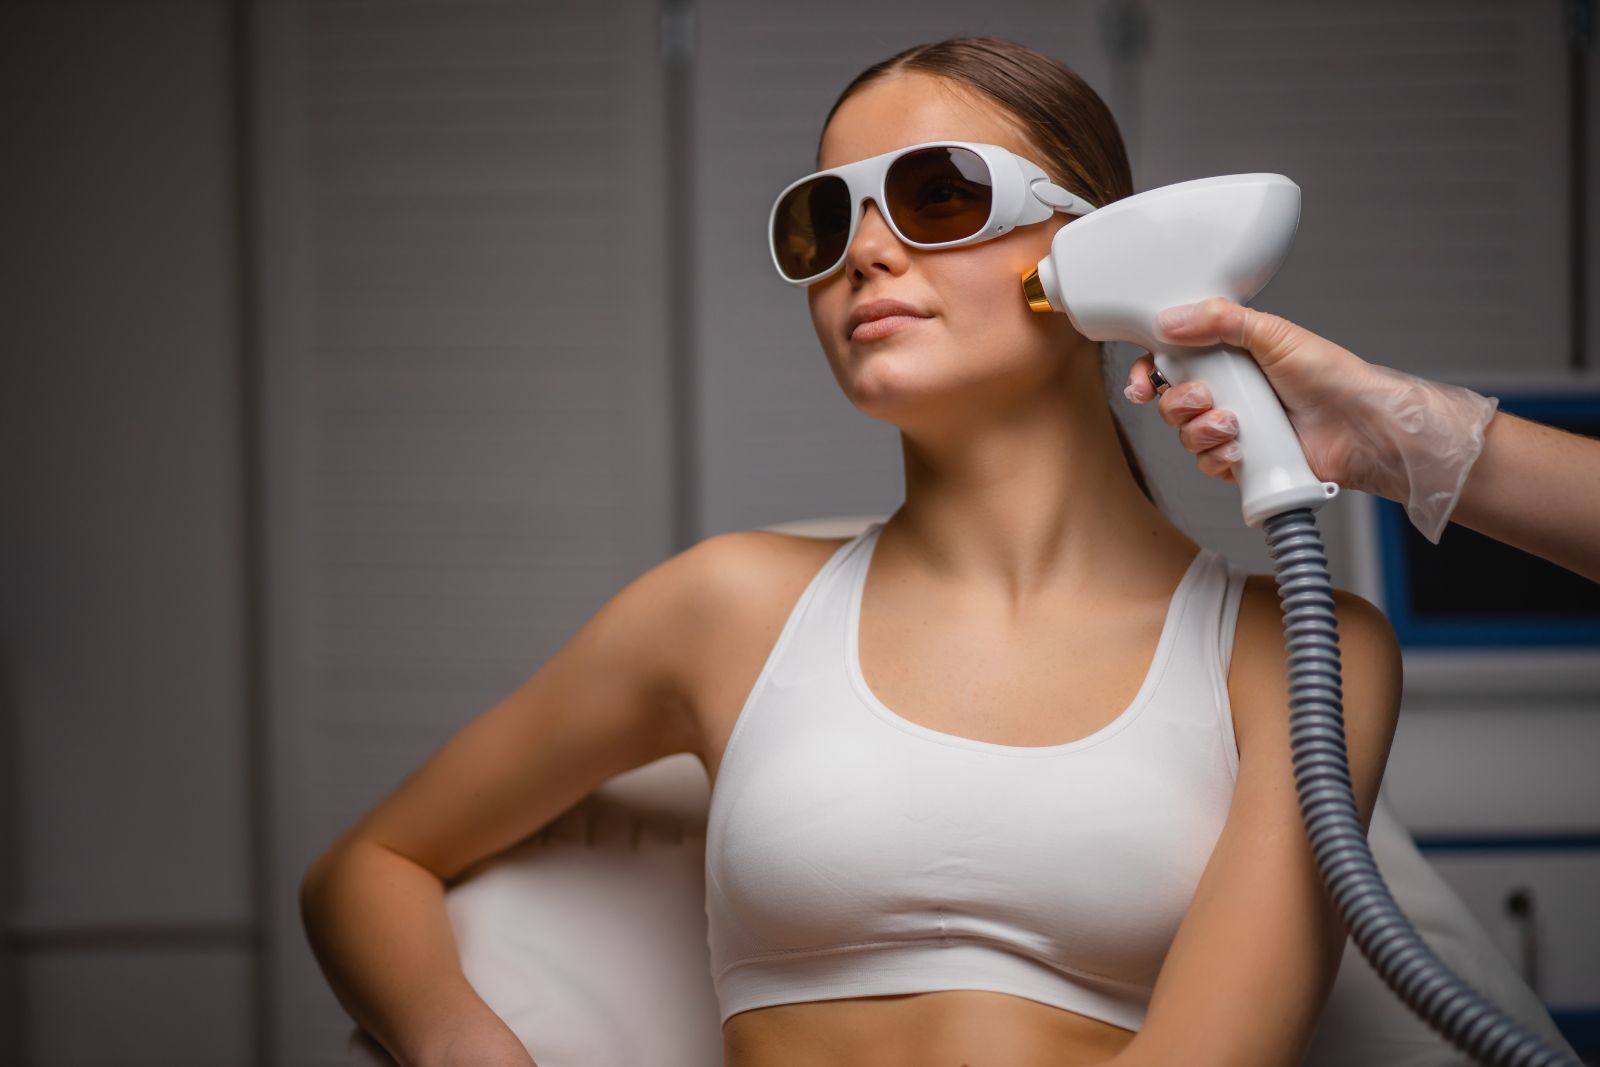 A woman is getting a laser treatment in a salon.